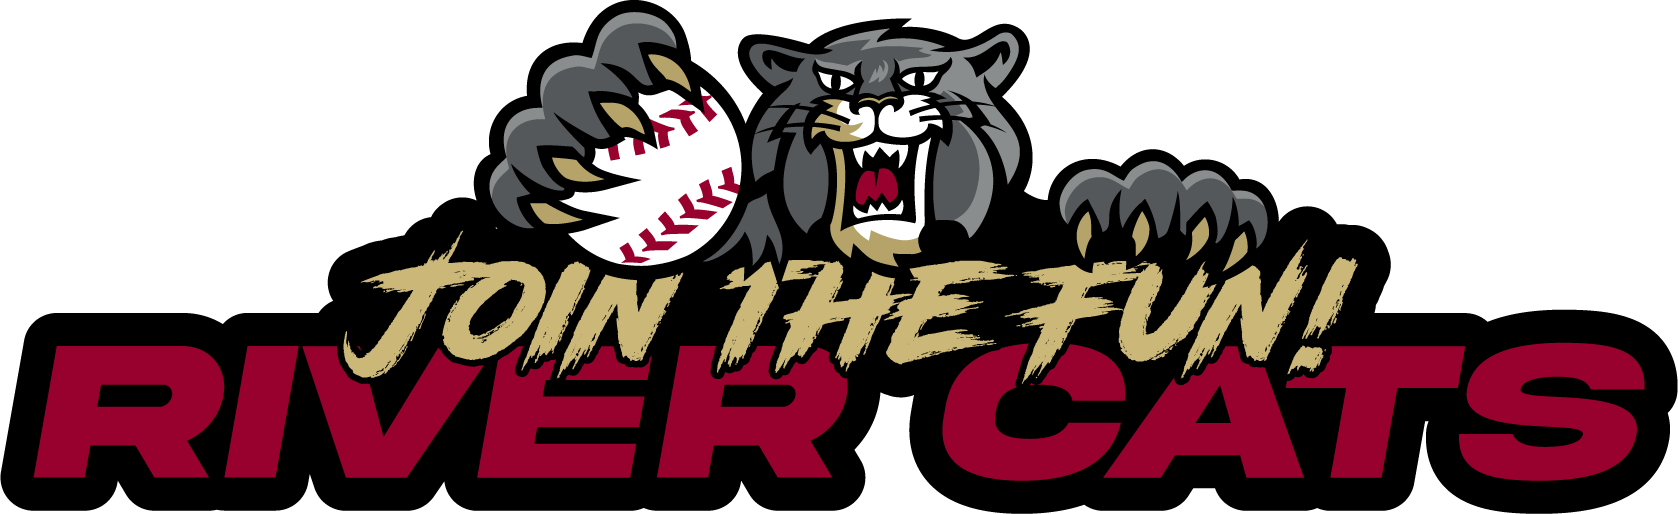 Free River Cats Tickets at the Northern California Home & Landscape Expo